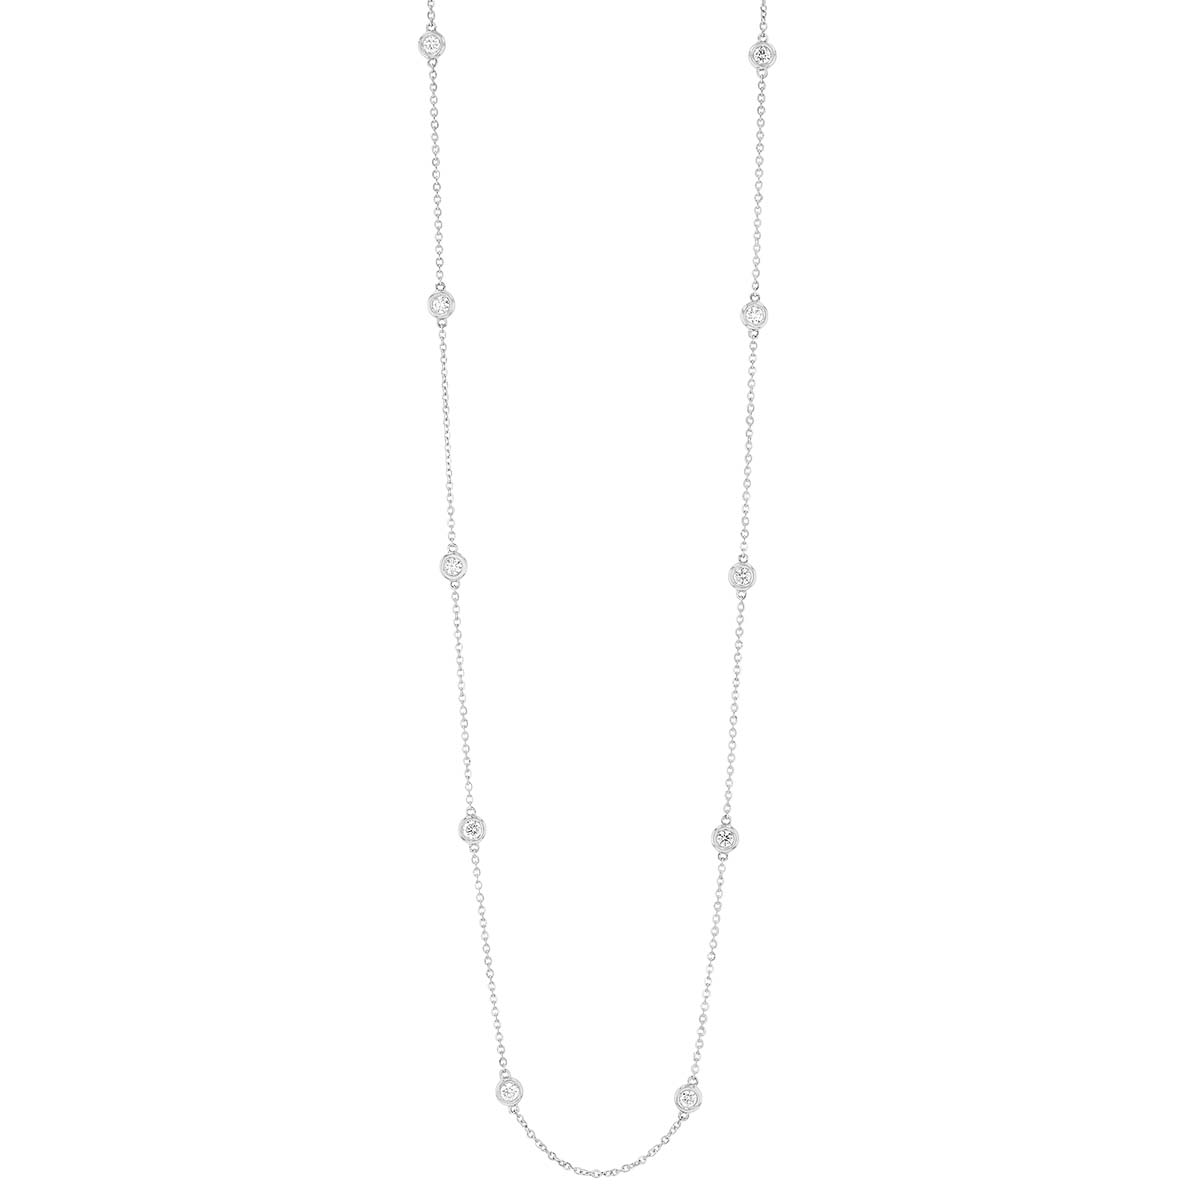 Borsheims Signature Collection Diamond 10 Station Necklace in White ...